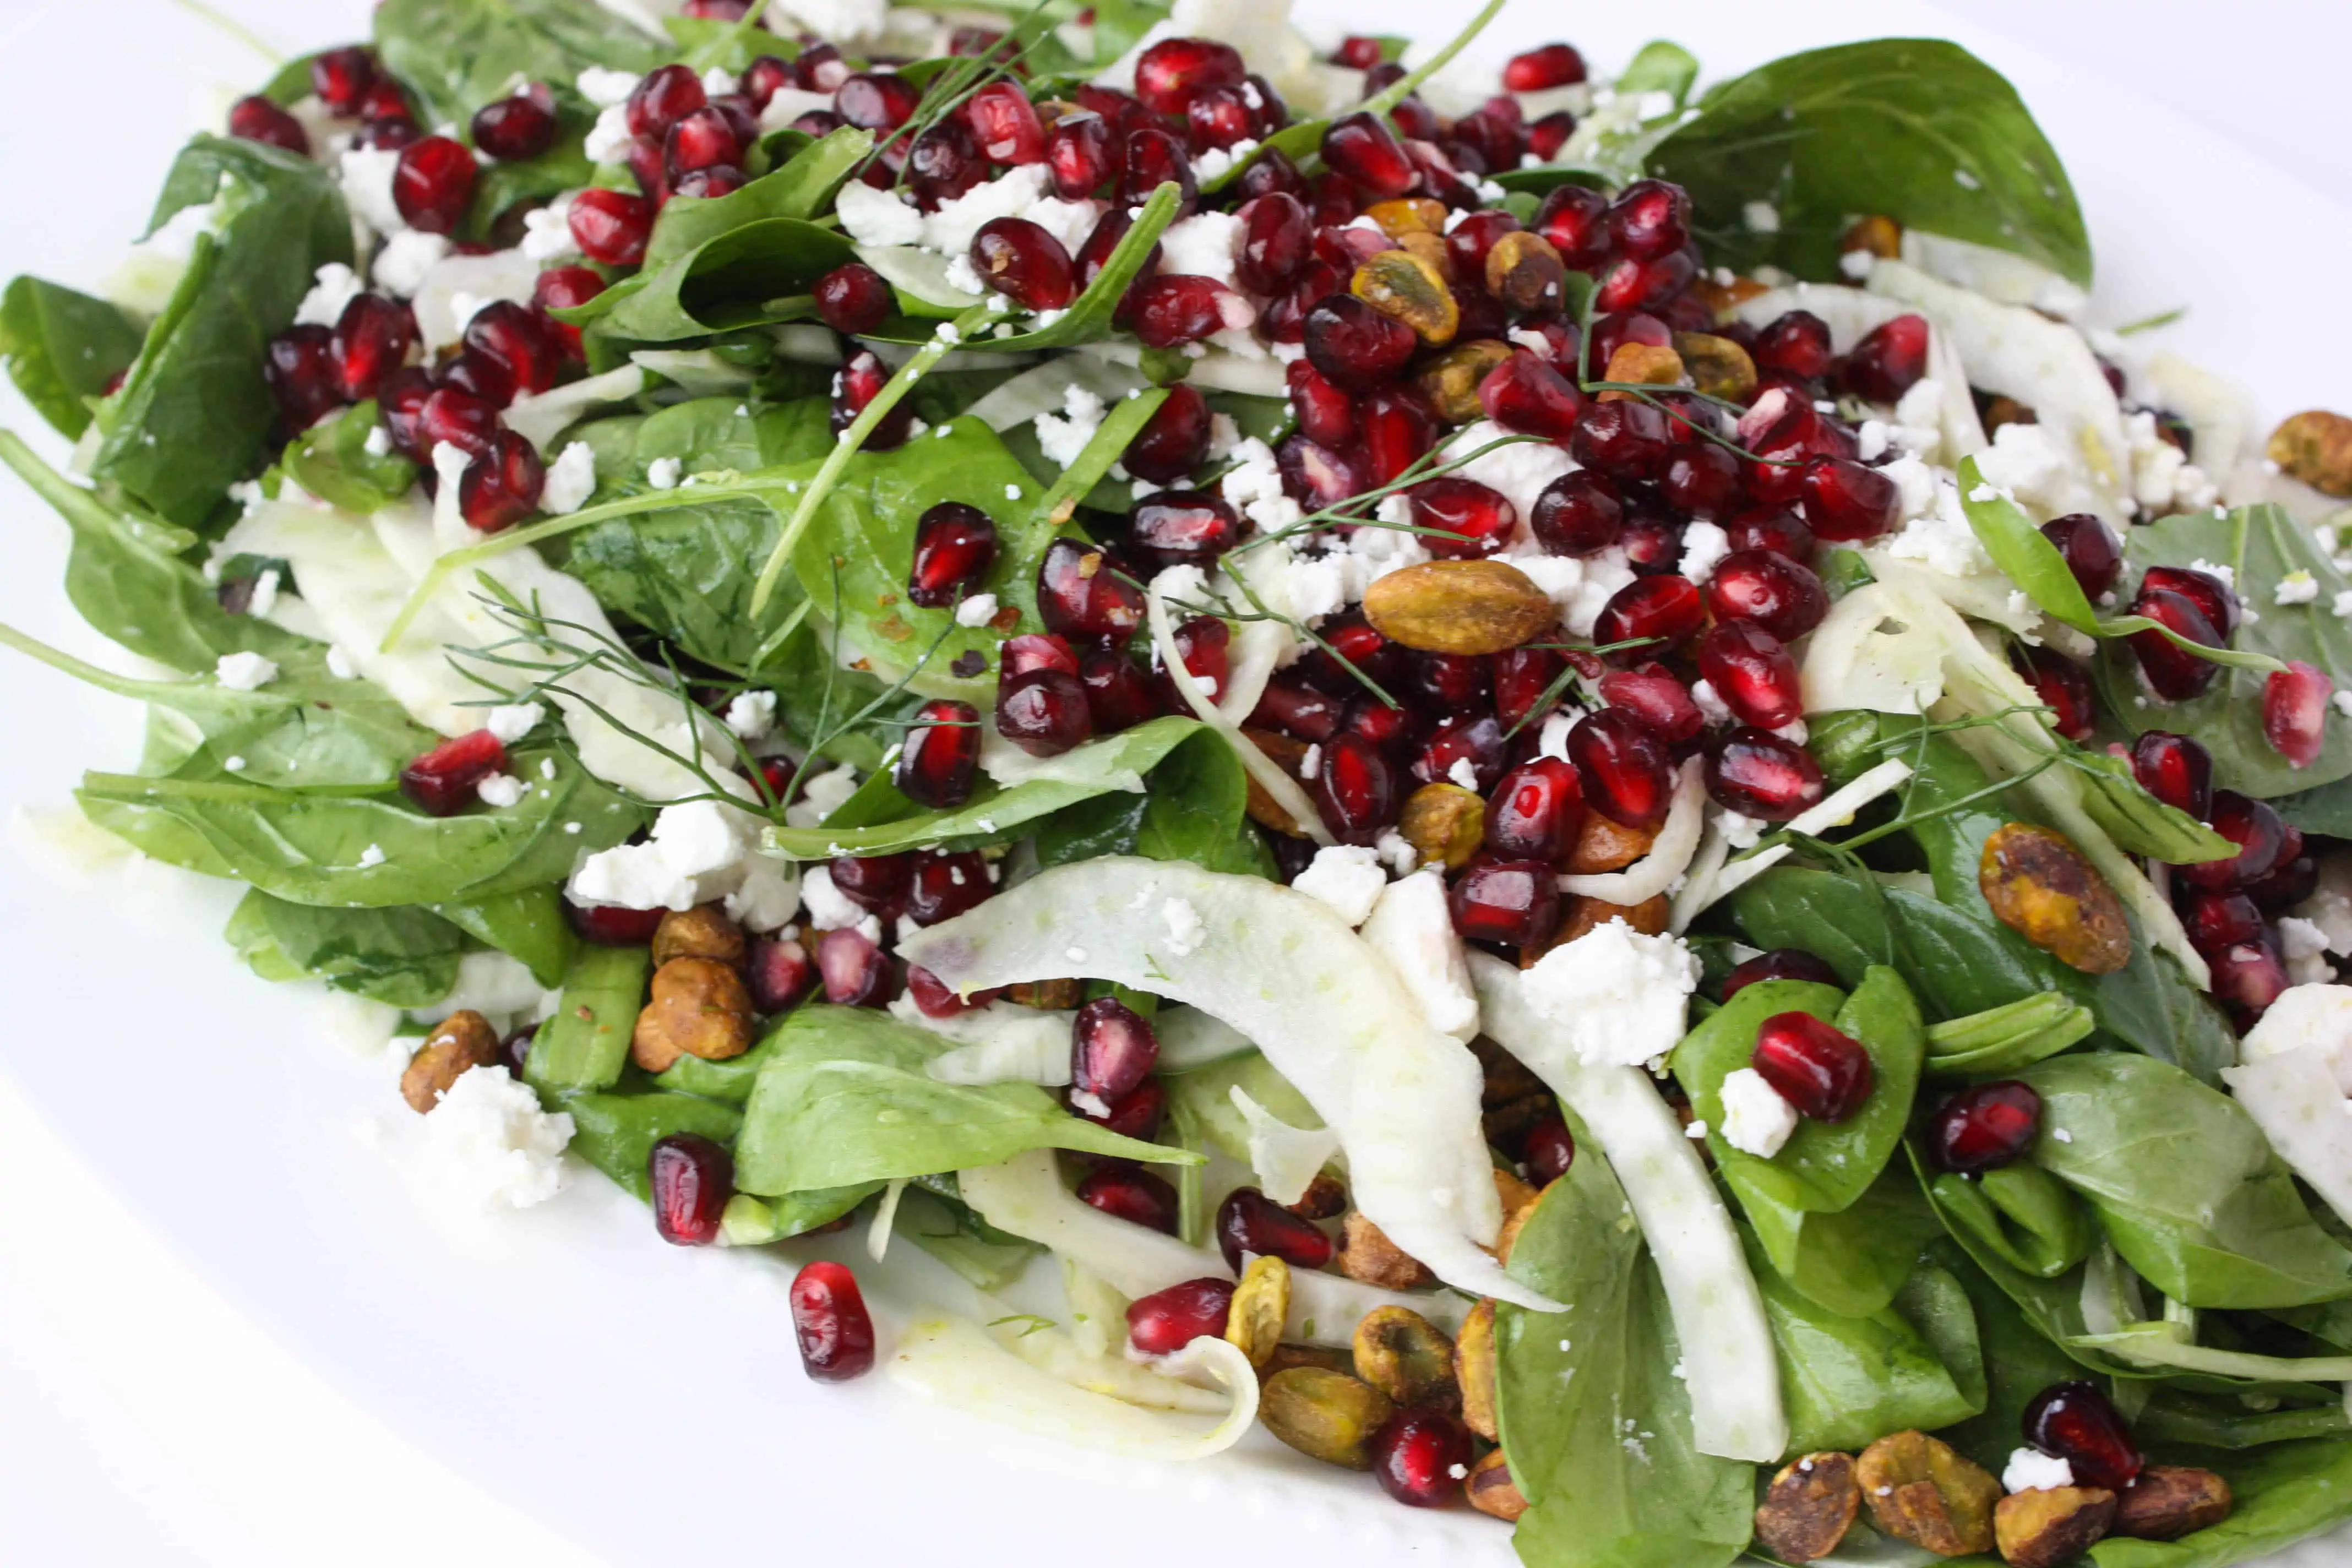 Pomegranate and Goat cheese salad